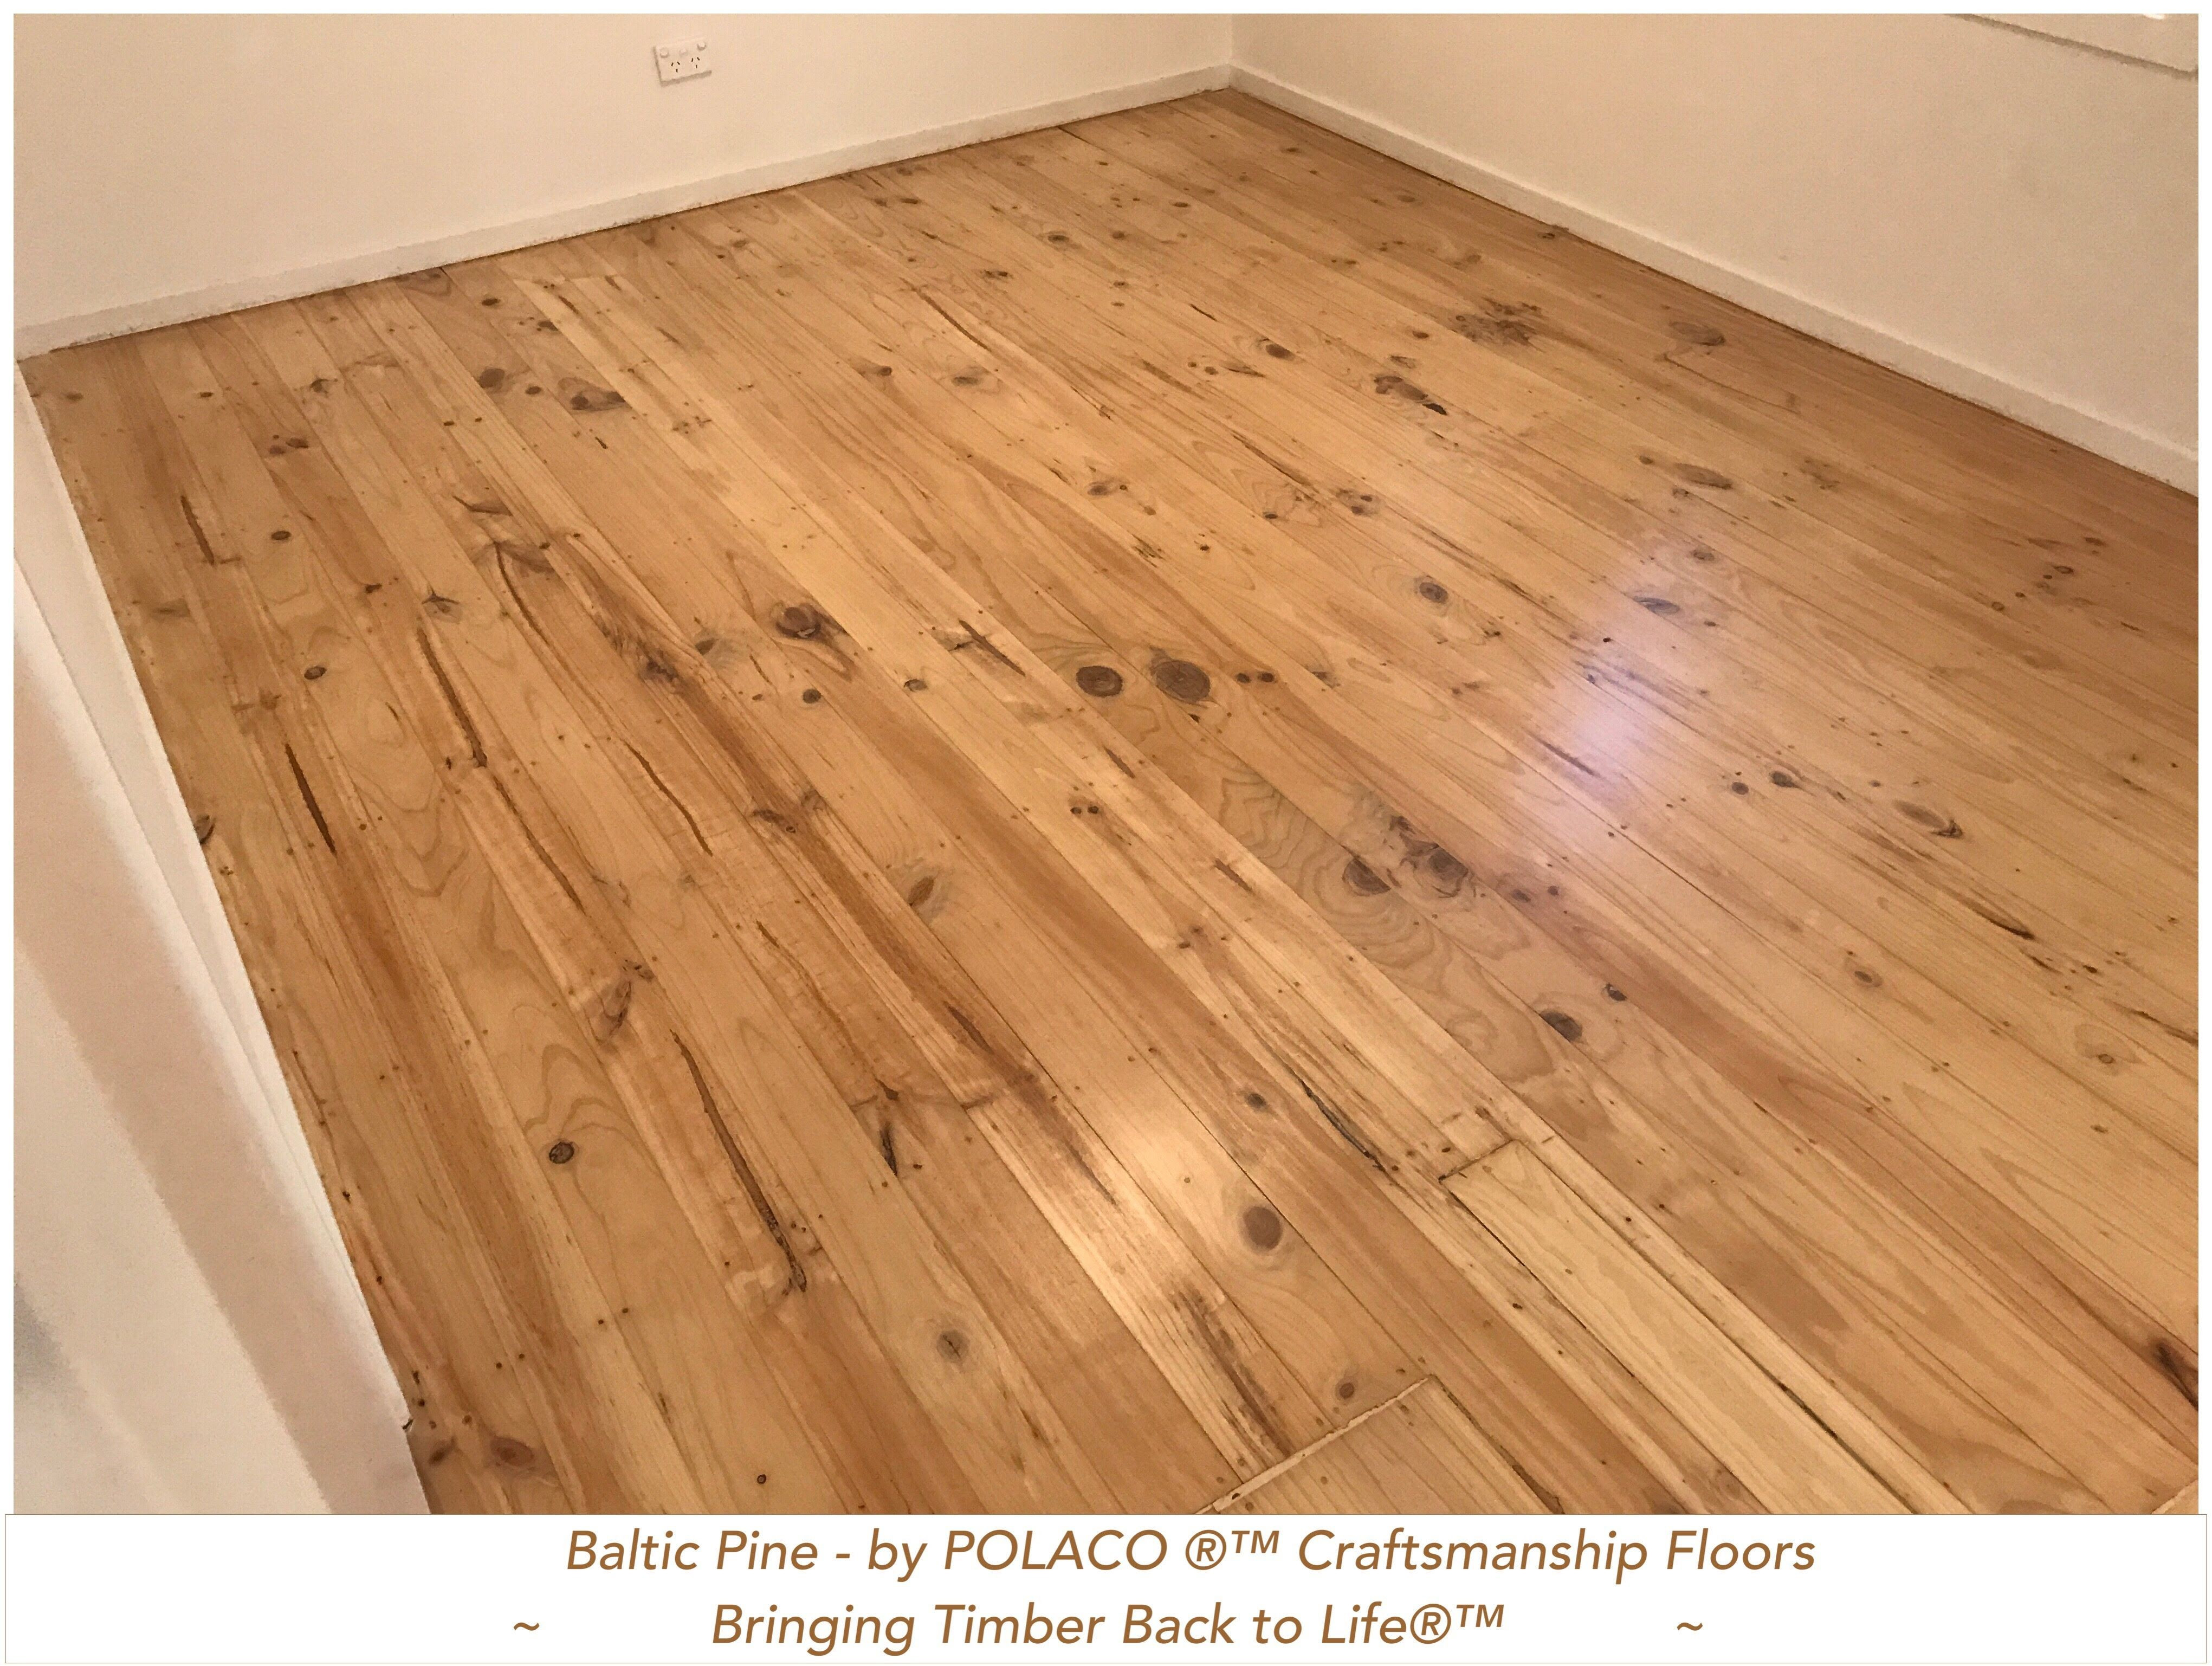 22 Nice Hardwood Floor Refinishing Dallas 2024 free download hardwood floor refinishing dallas of pin by polaco aac284c2a2 craftsmanship floors floor sanding floor in find this pin and more on baltic pine by polaco aac284c2a2 craftsmanship floors by p